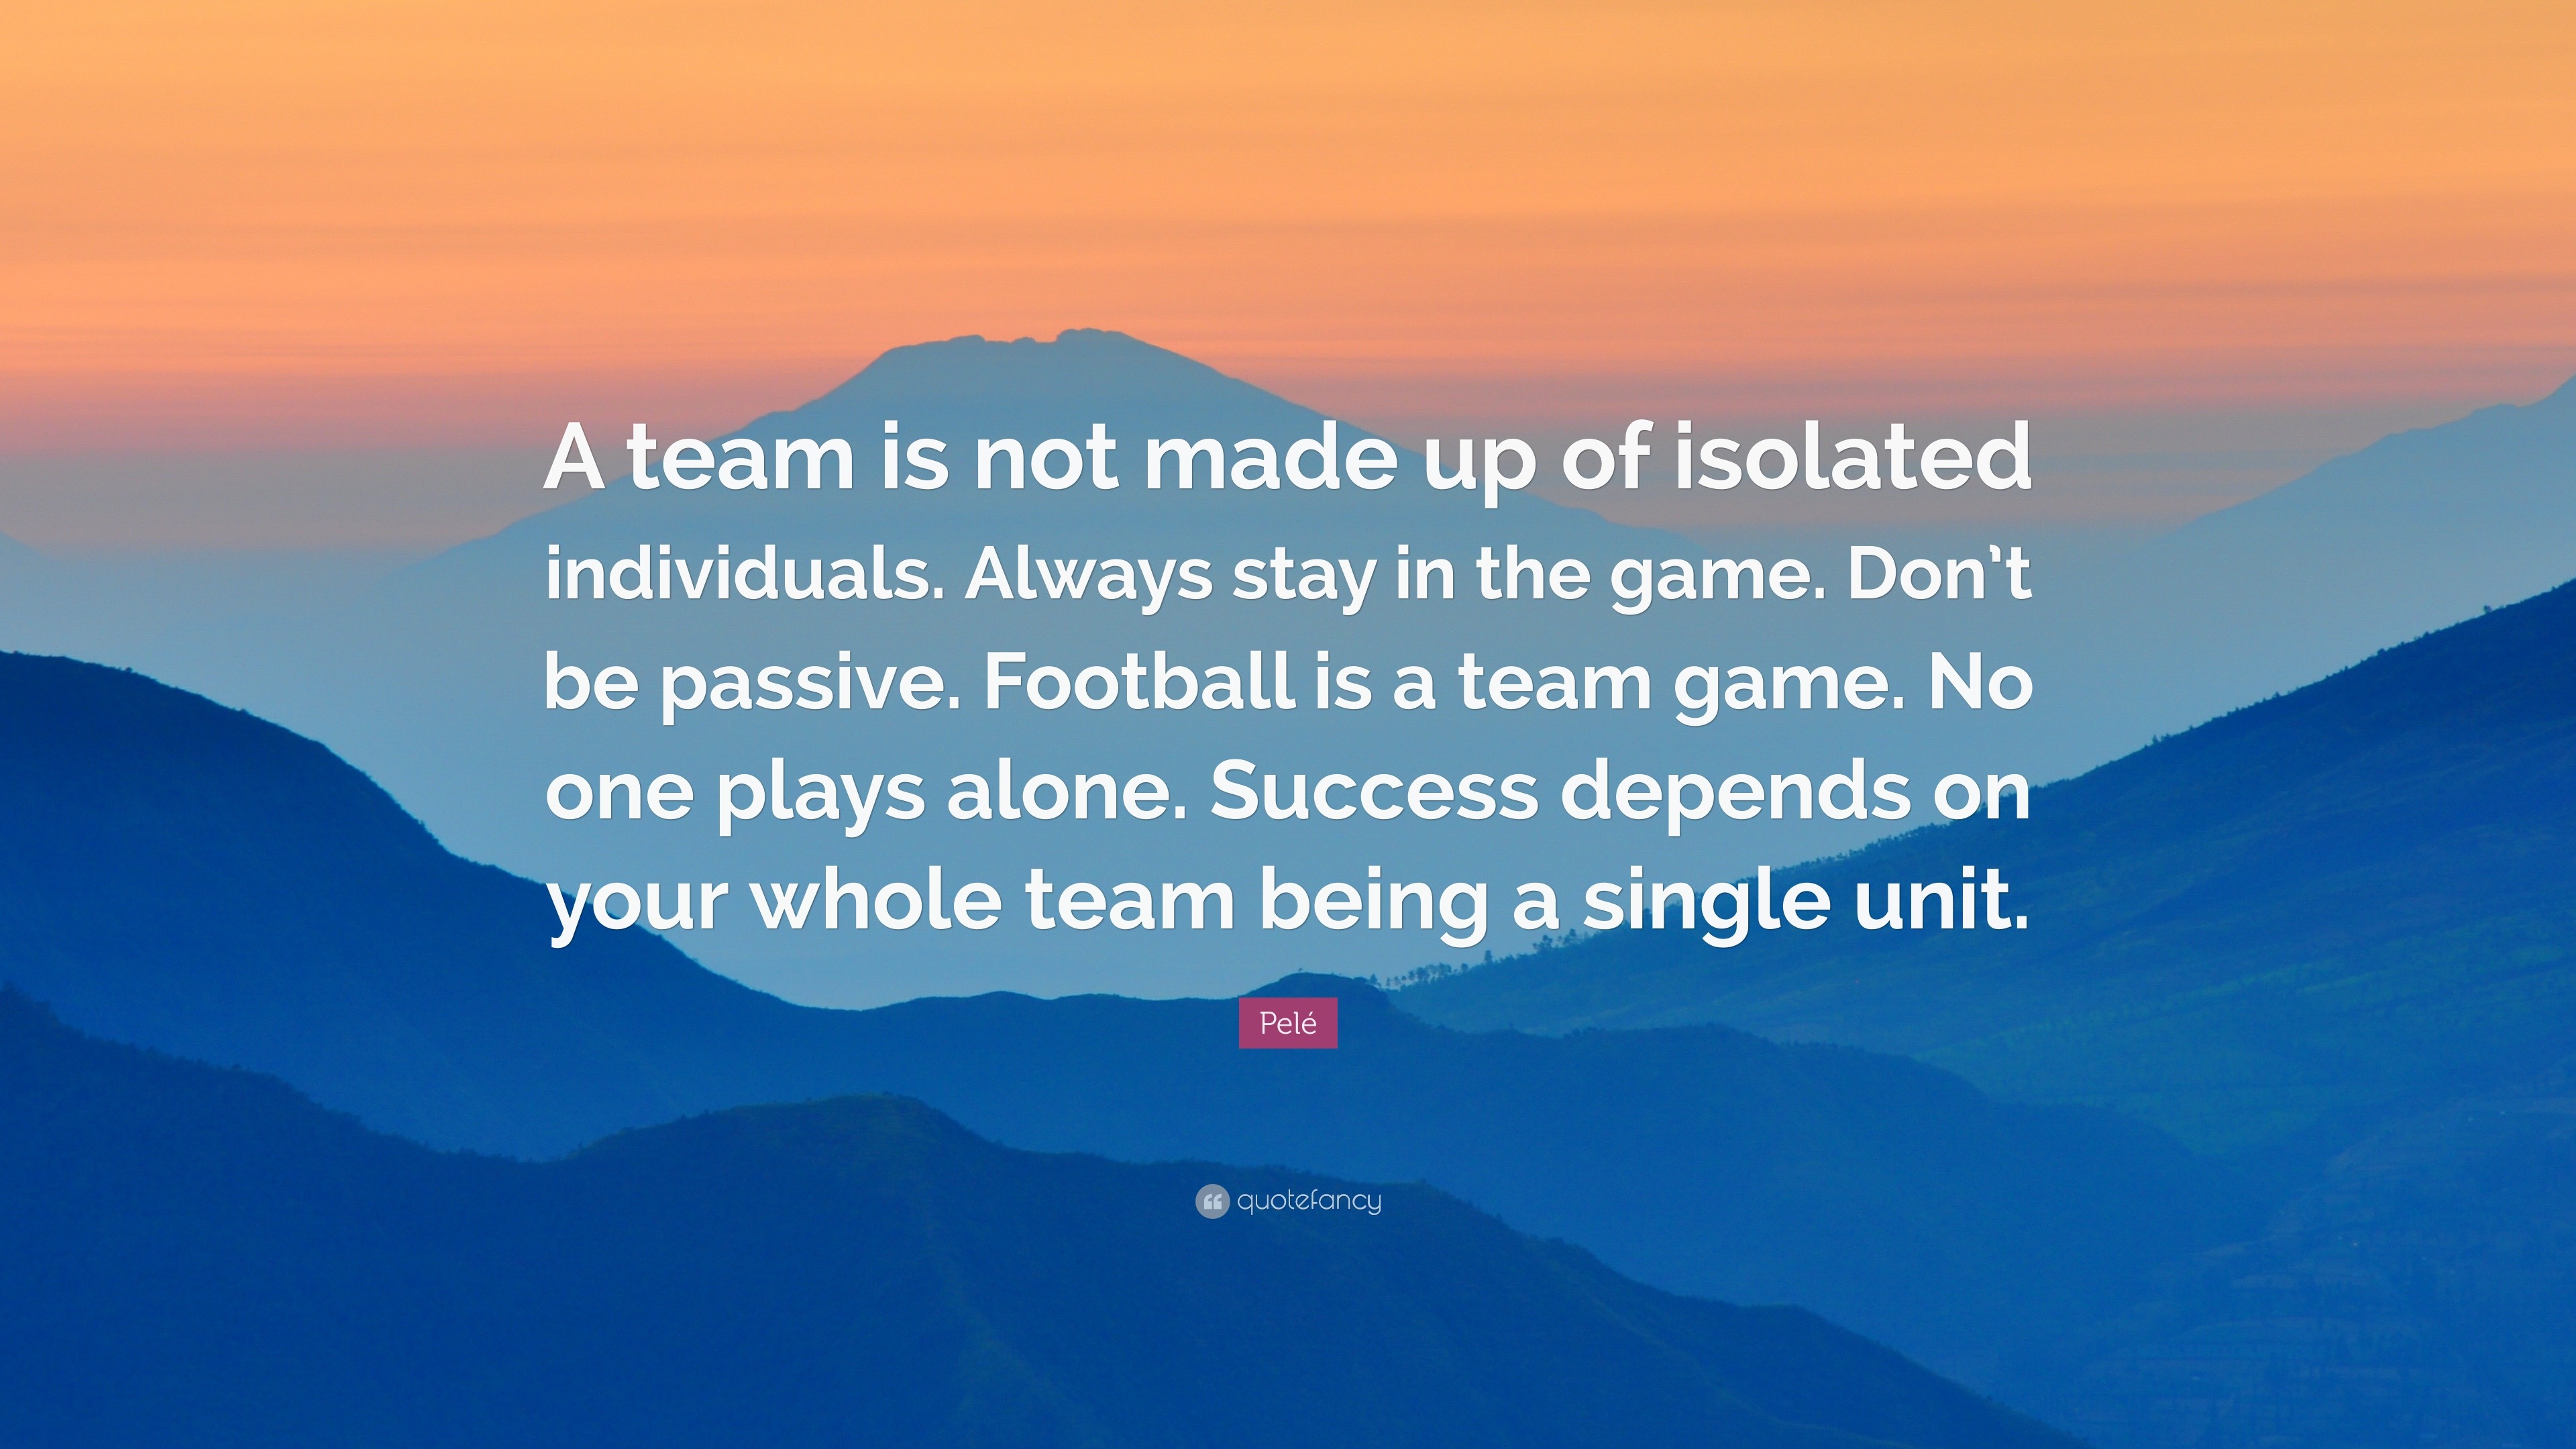 Pelé Quote: “A team is not made up of isolated individuals. Always stay ...